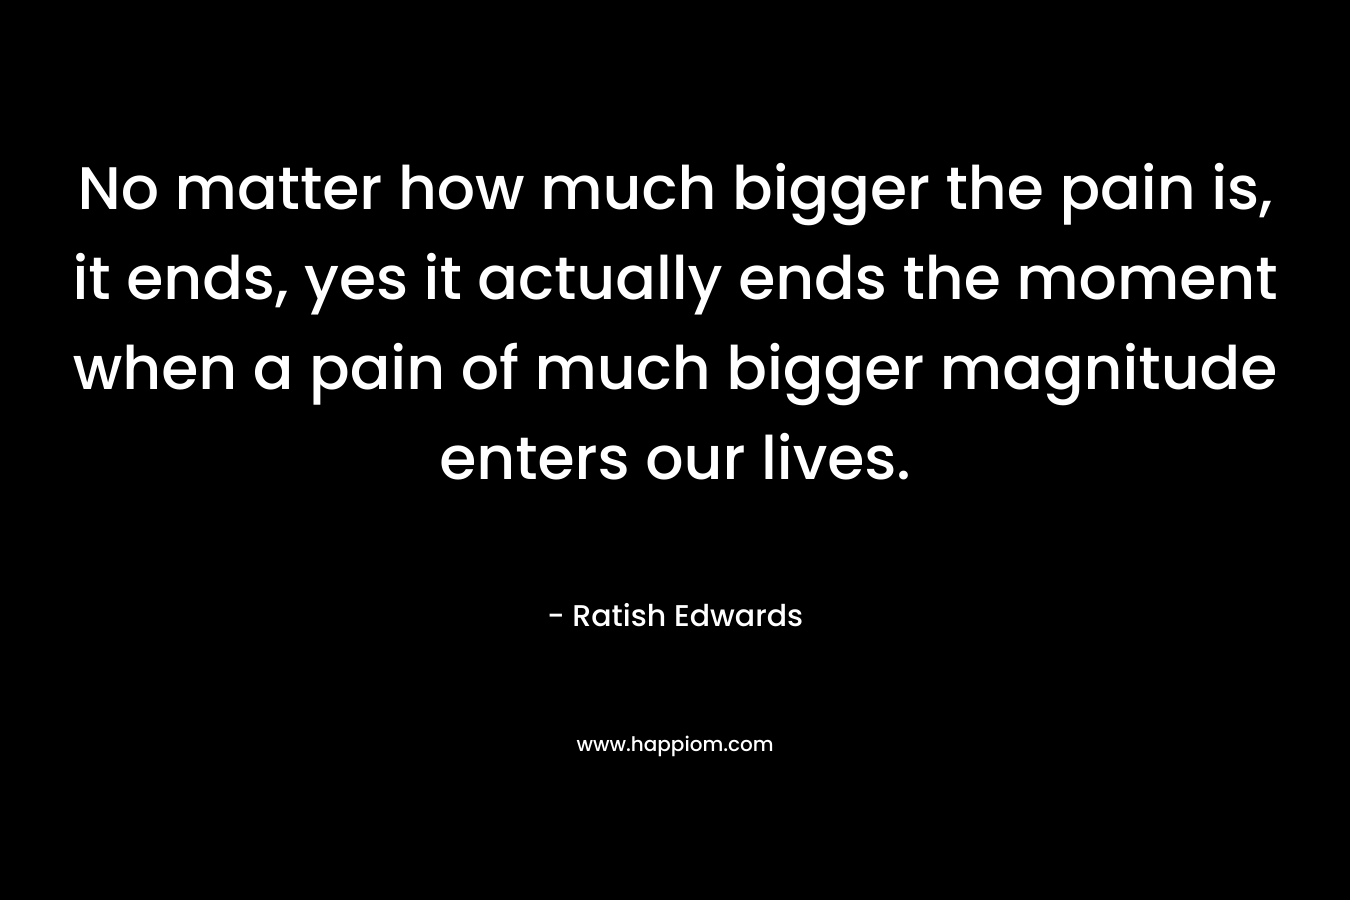 No matter how much bigger the pain is, it ends, yes it actually ends the moment when a pain of much bigger magnitude enters our lives. – Ratish Edwards